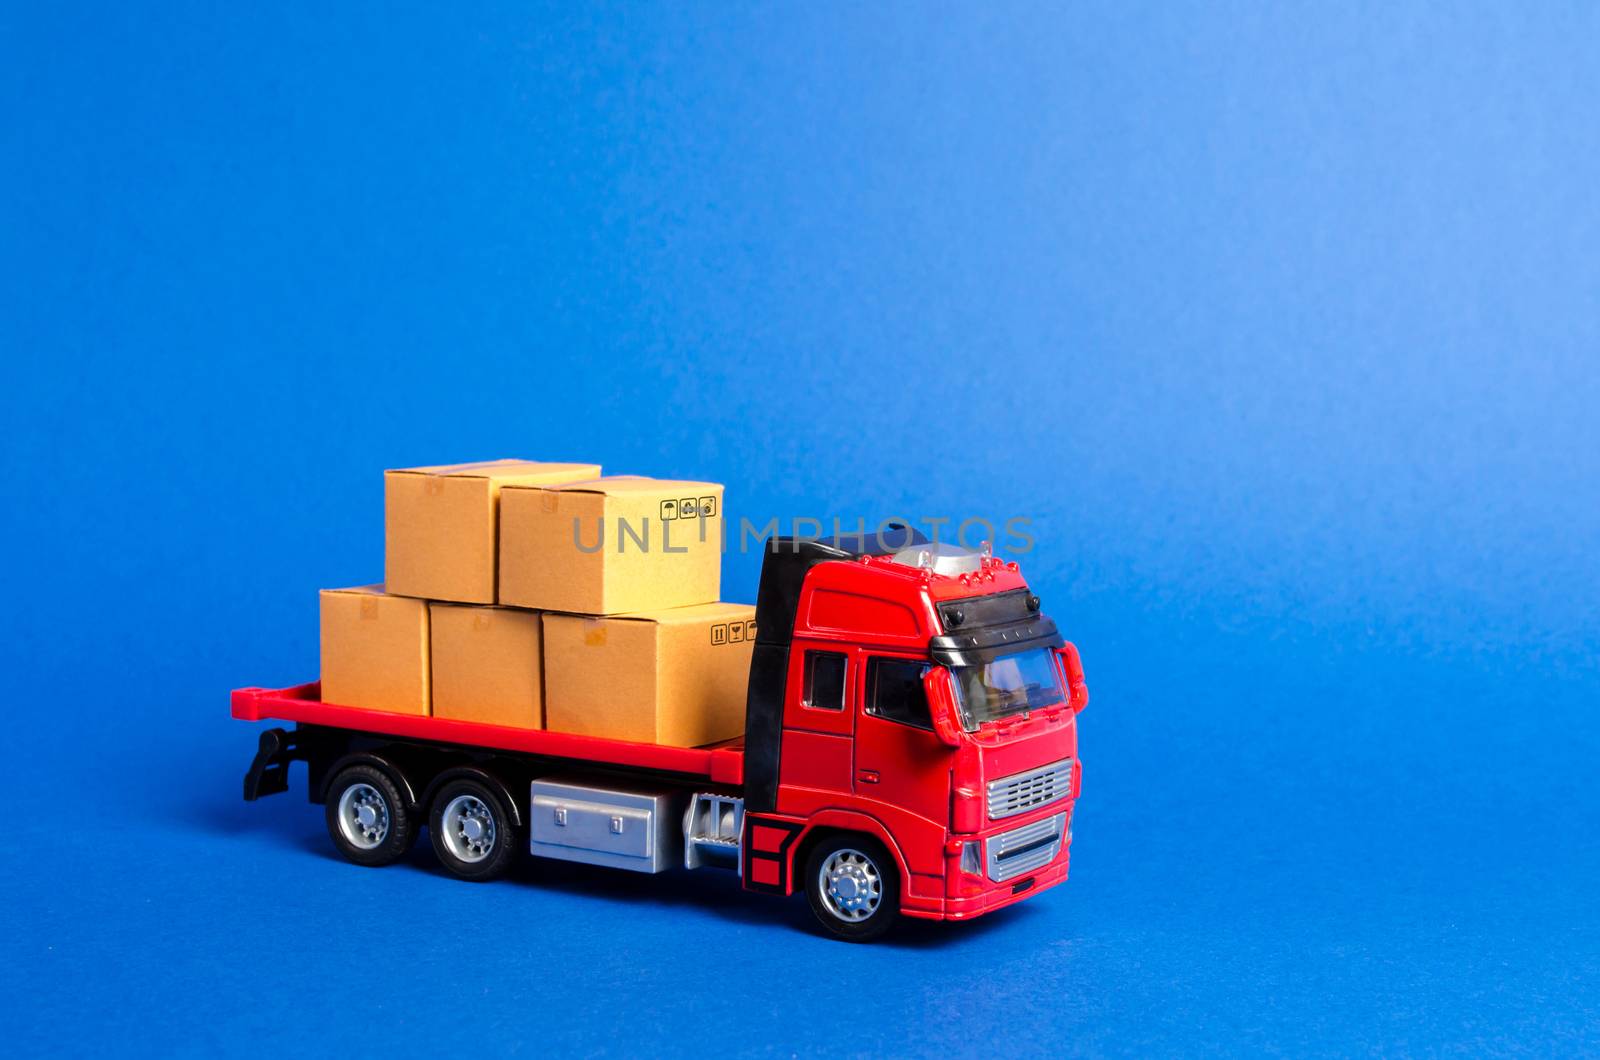 A red truck loaded with boxes. Services transportation of goods and products, logistics and infrastructure. Transportation company. Warehousing and supply. Optimization of delivery logistics.